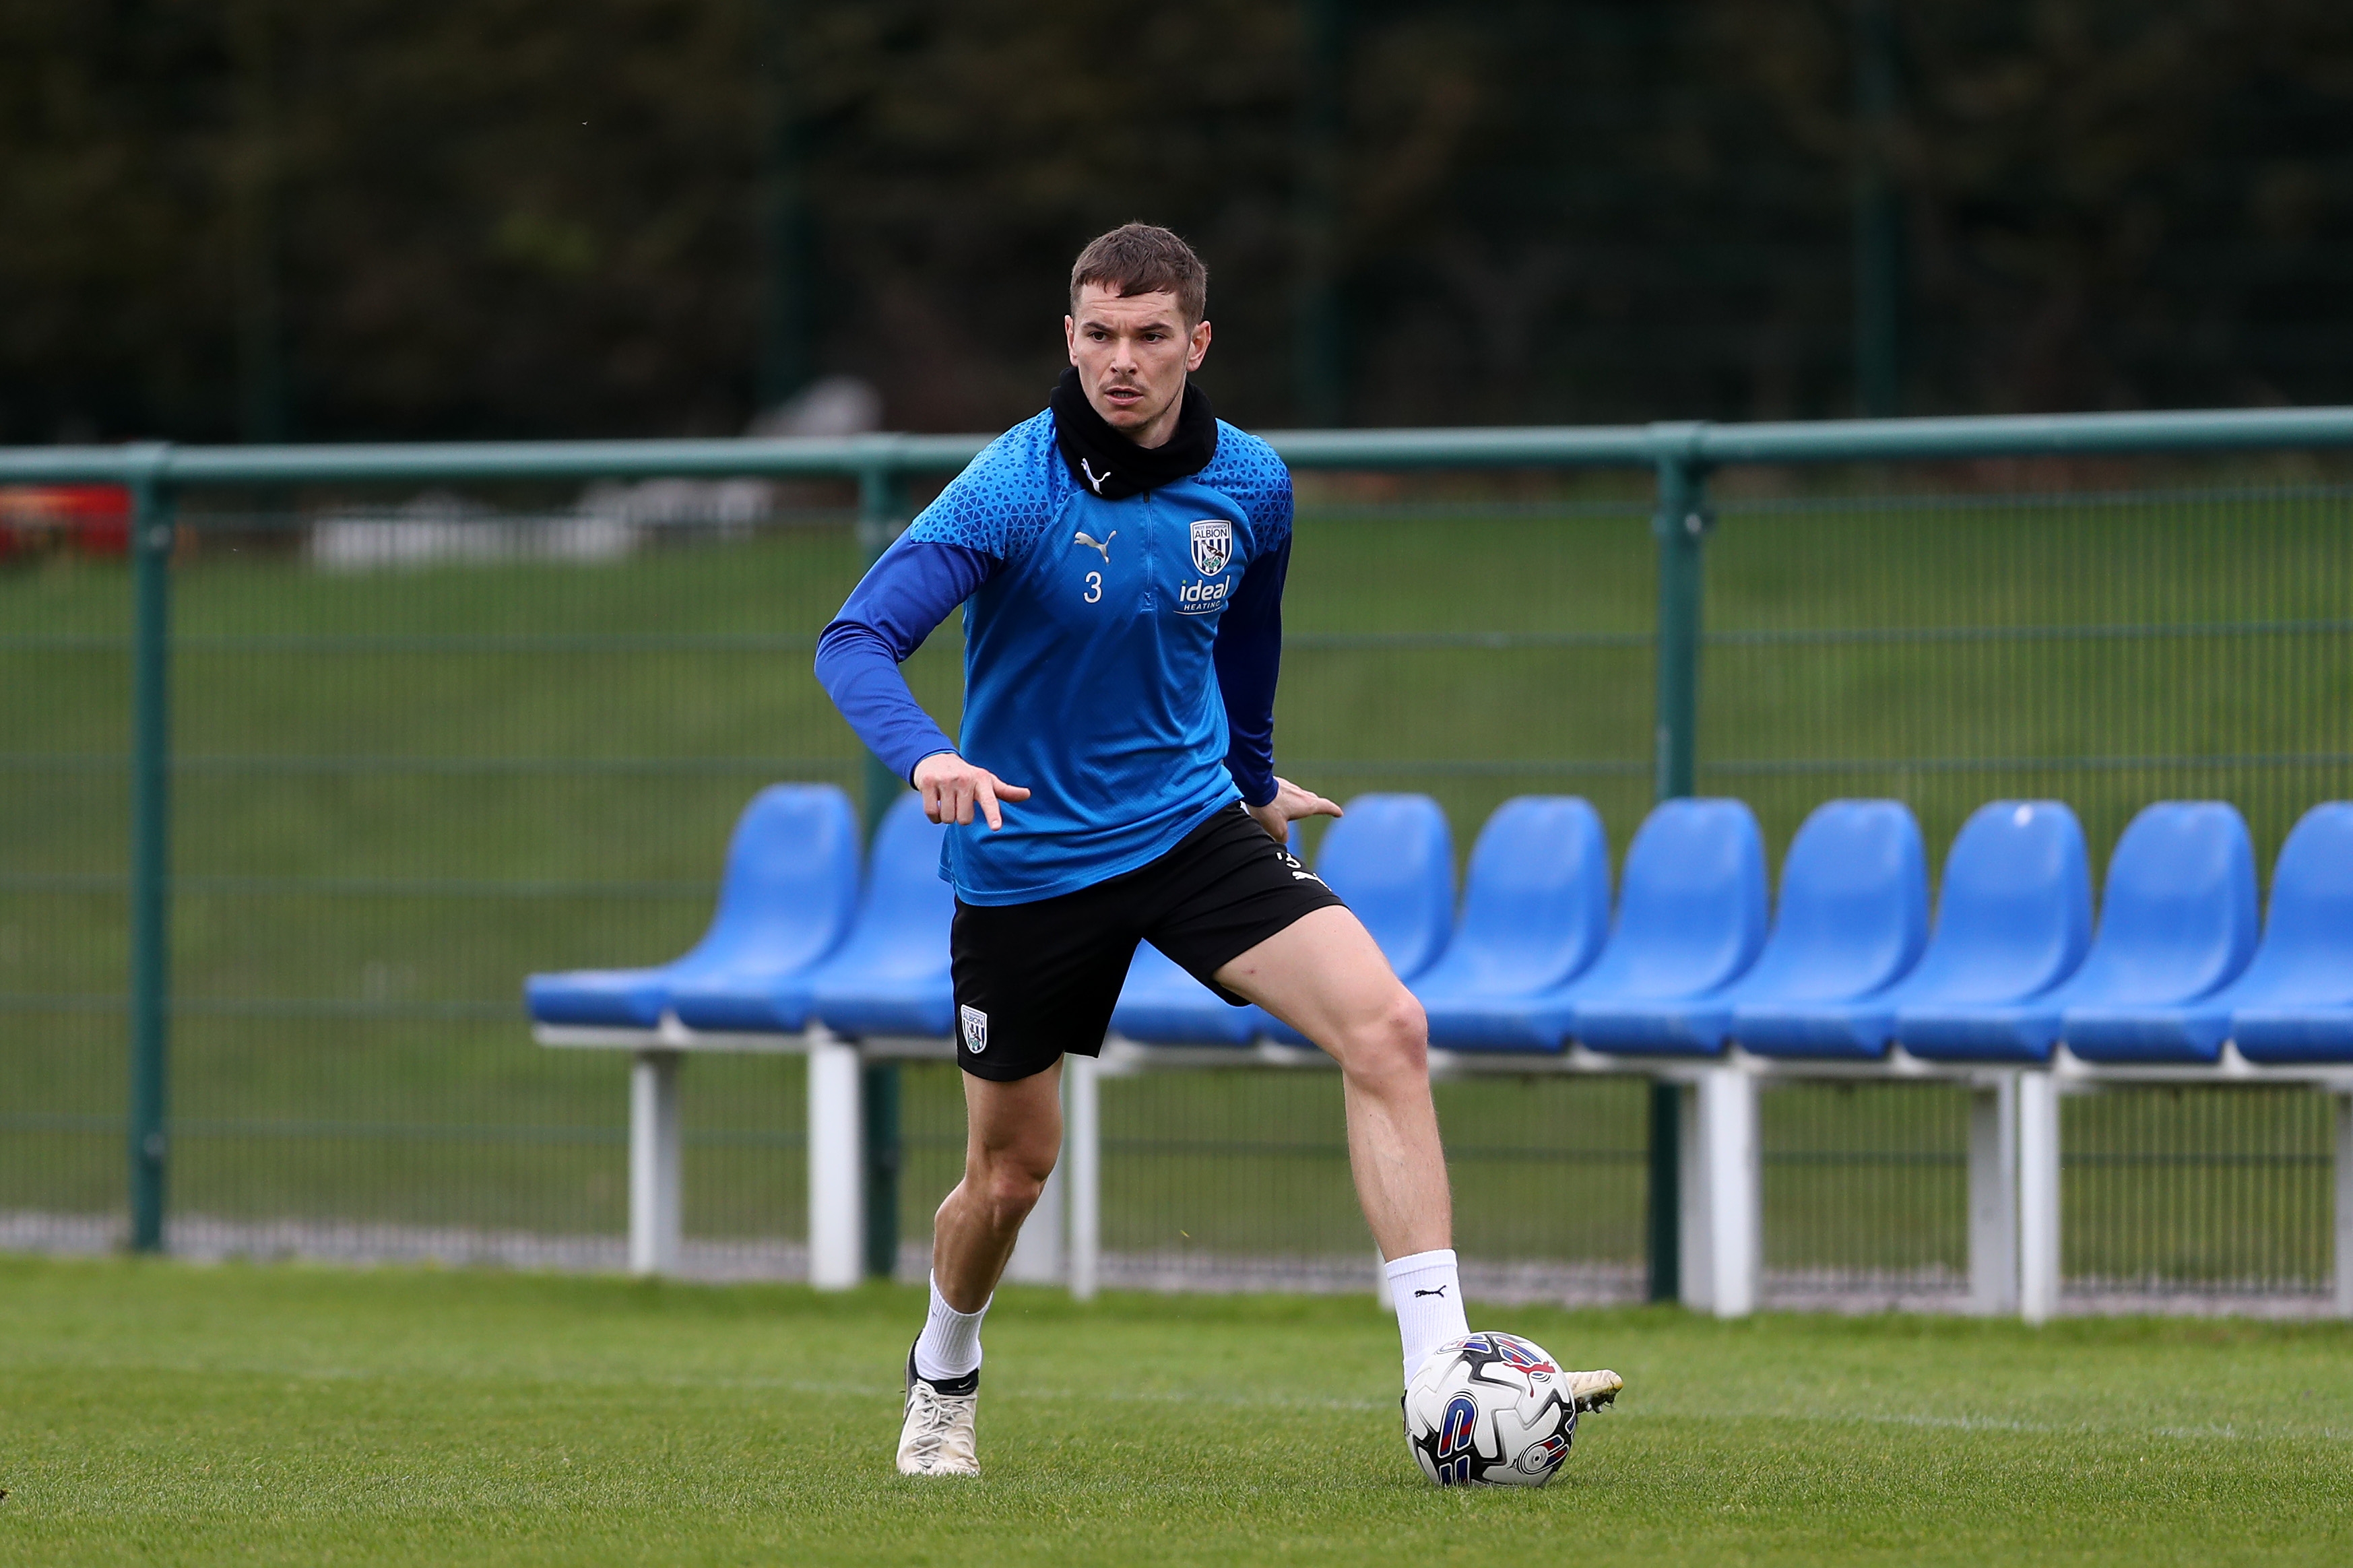 Conor Townsend on the ball during a training session